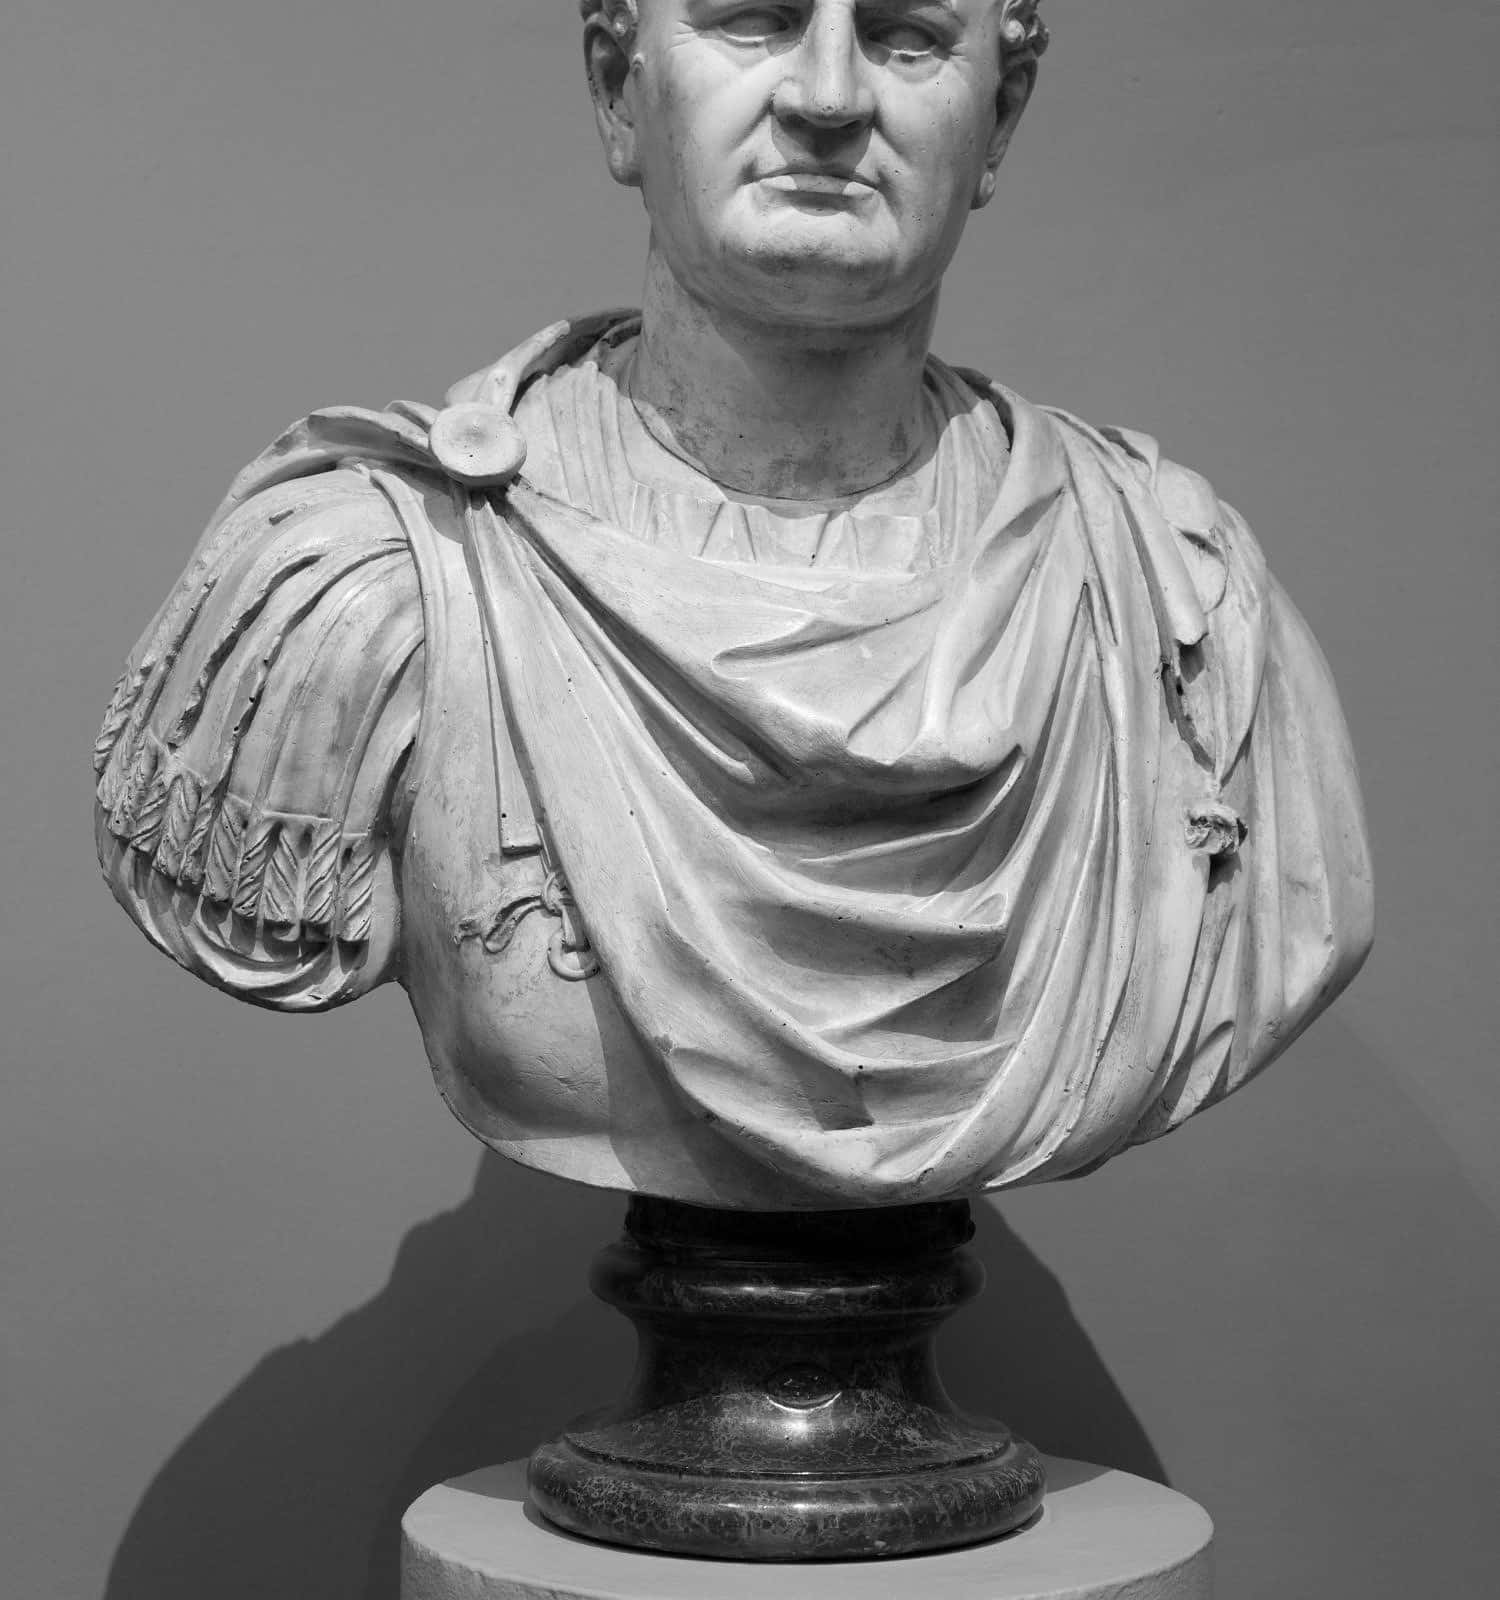 Old Bust of Vespasian.He was Roman Emperor from AD 69 to AD 79. Vespasian founded the Flavian dynasty that ruled the Empire for a quarter century.